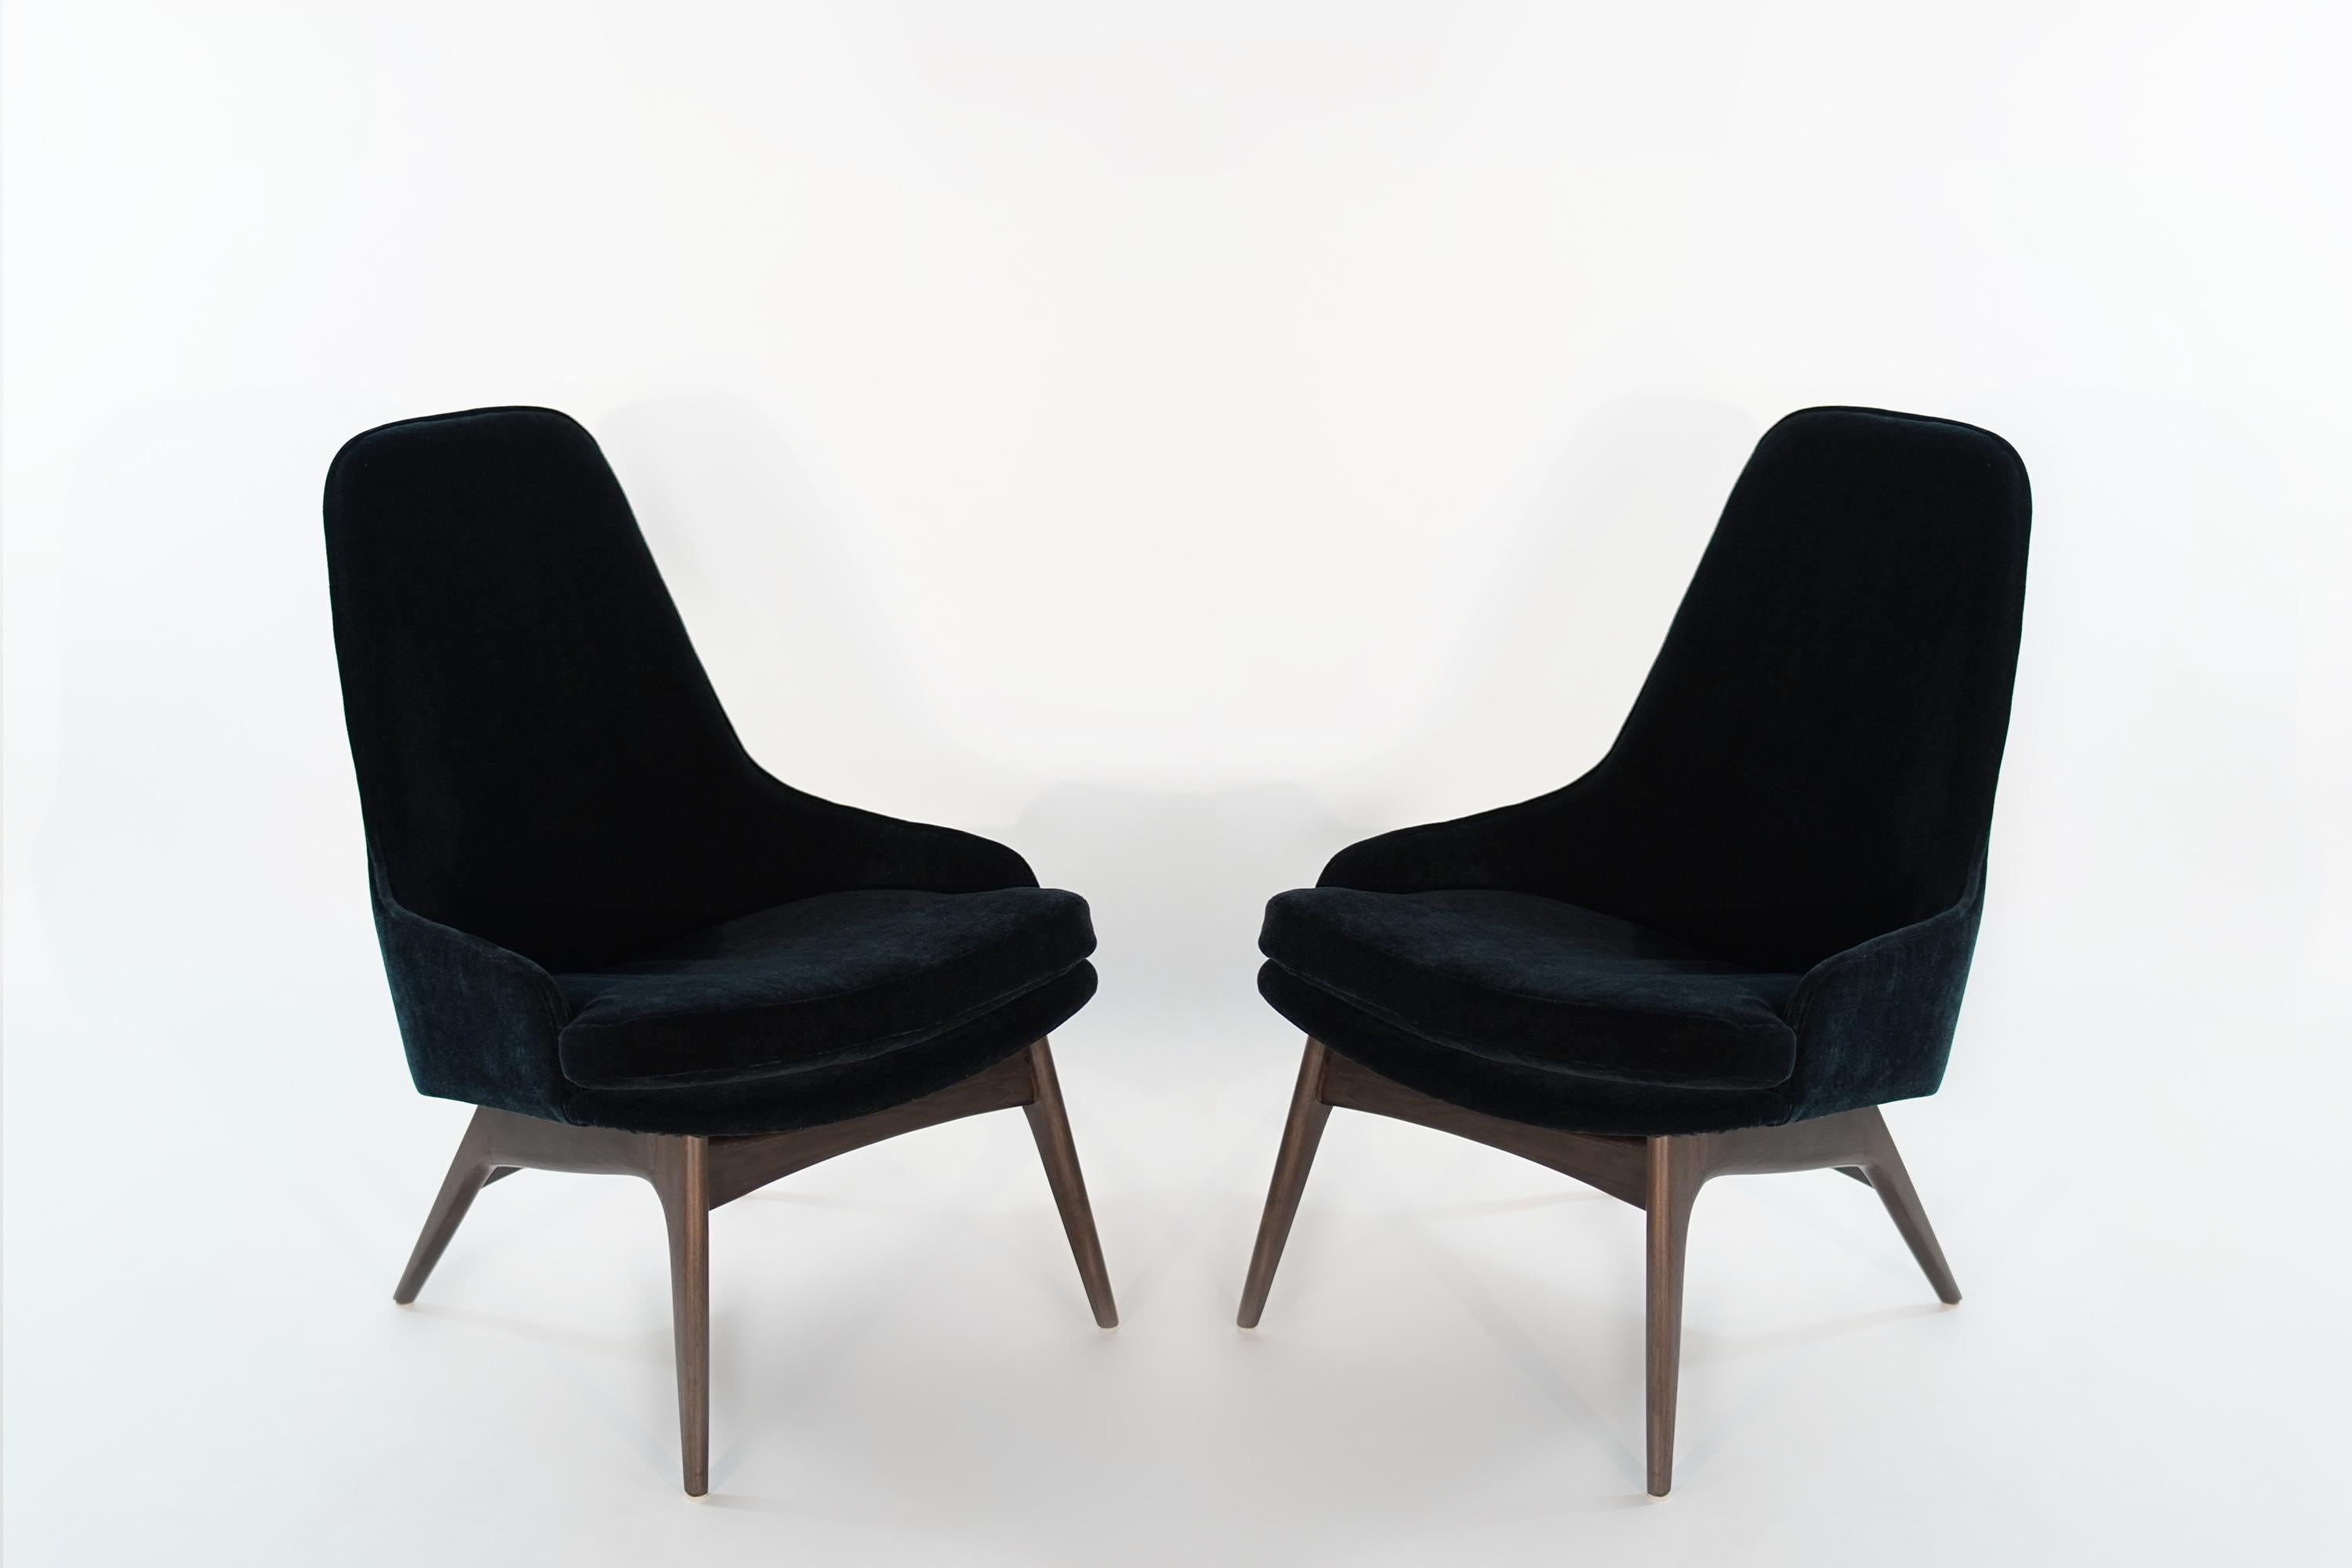 Sculptural set of slipper chairs designed by Adrian Pearsall for Craft Associates, circa 1950s. Walnut bases fully restored, reupholstered in navy blue mohair by Donghia.